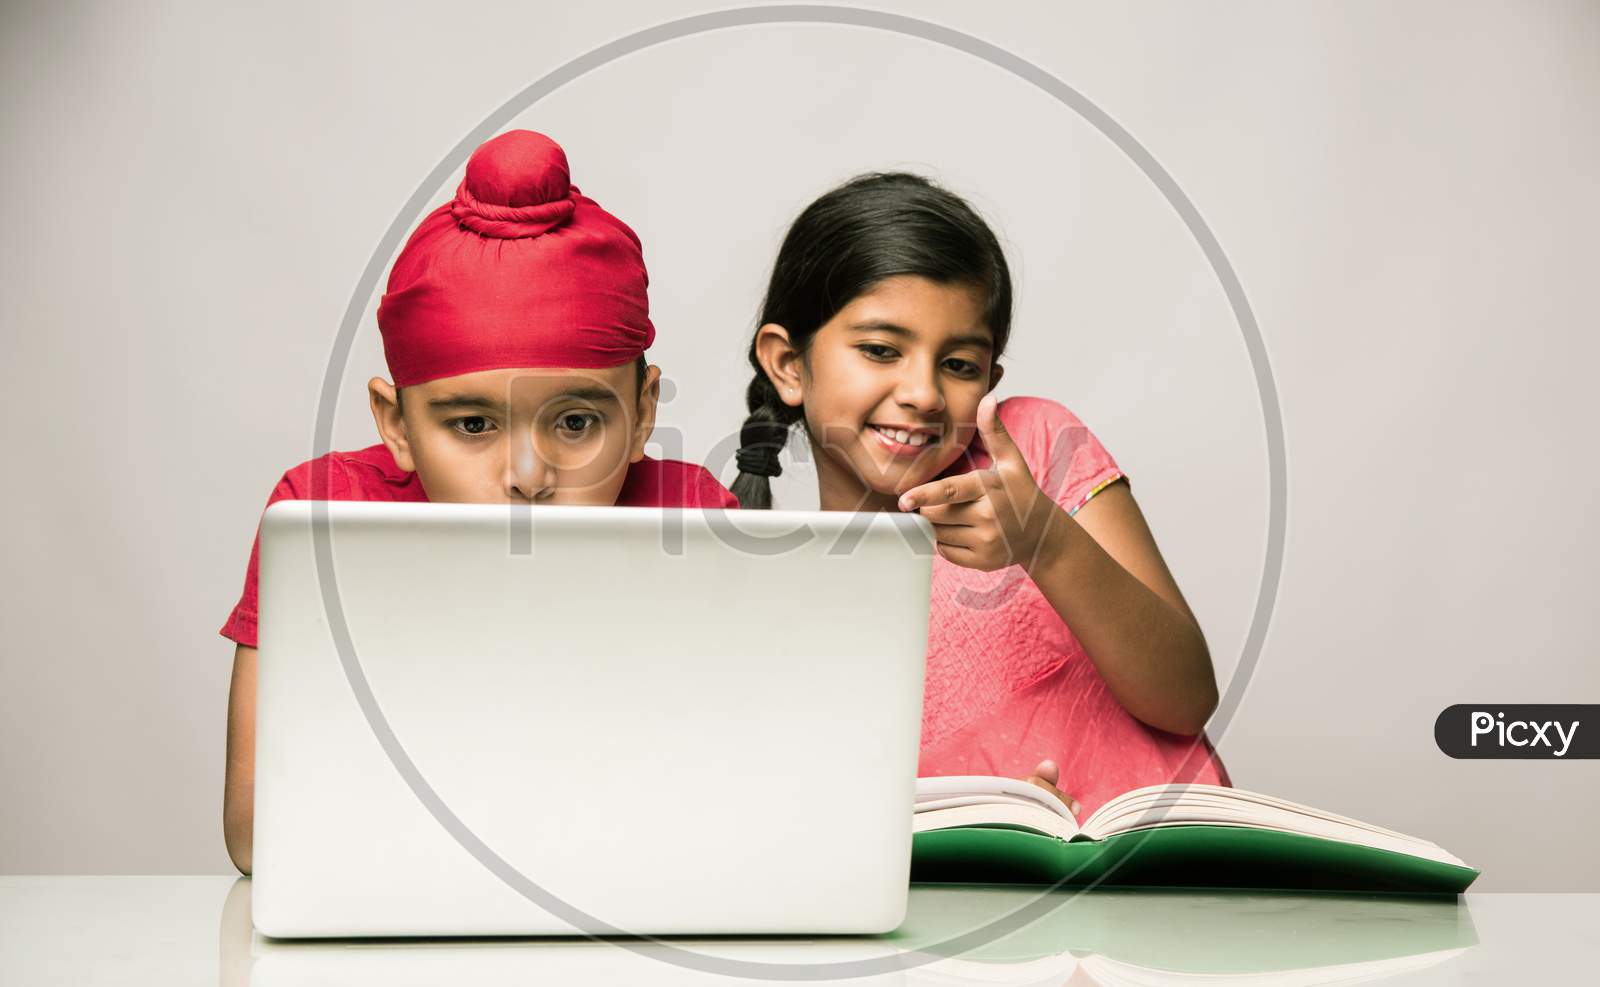 Indian Sikh/punjabi little boy studying with laptop and books at study table